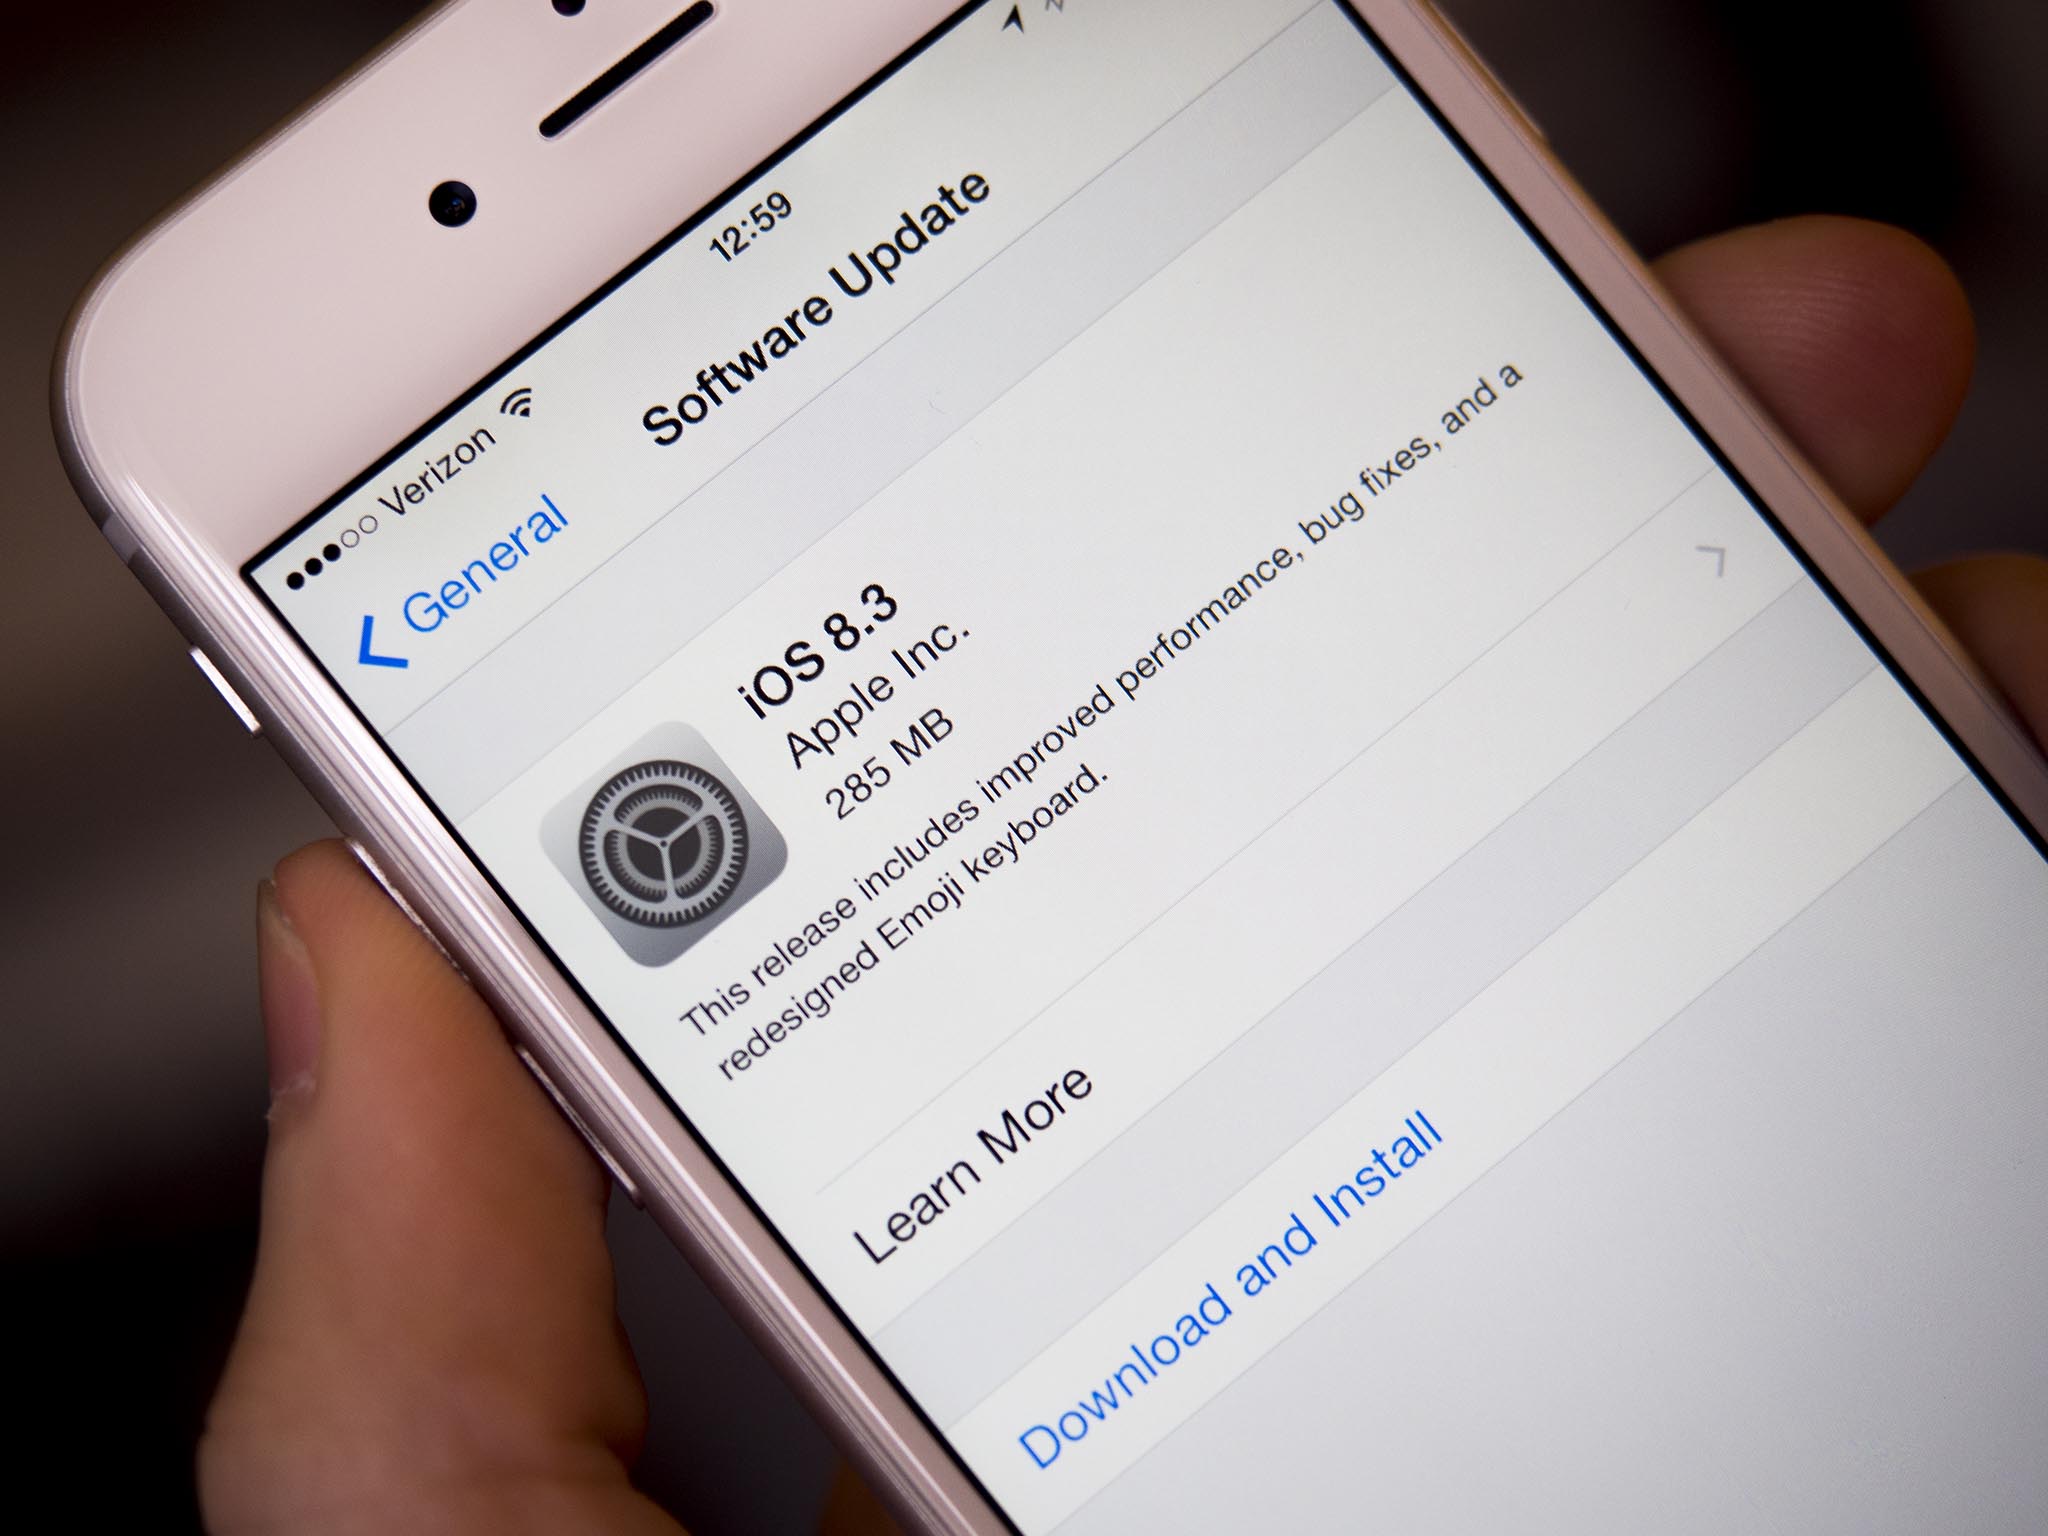 Apple releases iOS 8.3 to the public with performance improvements, new